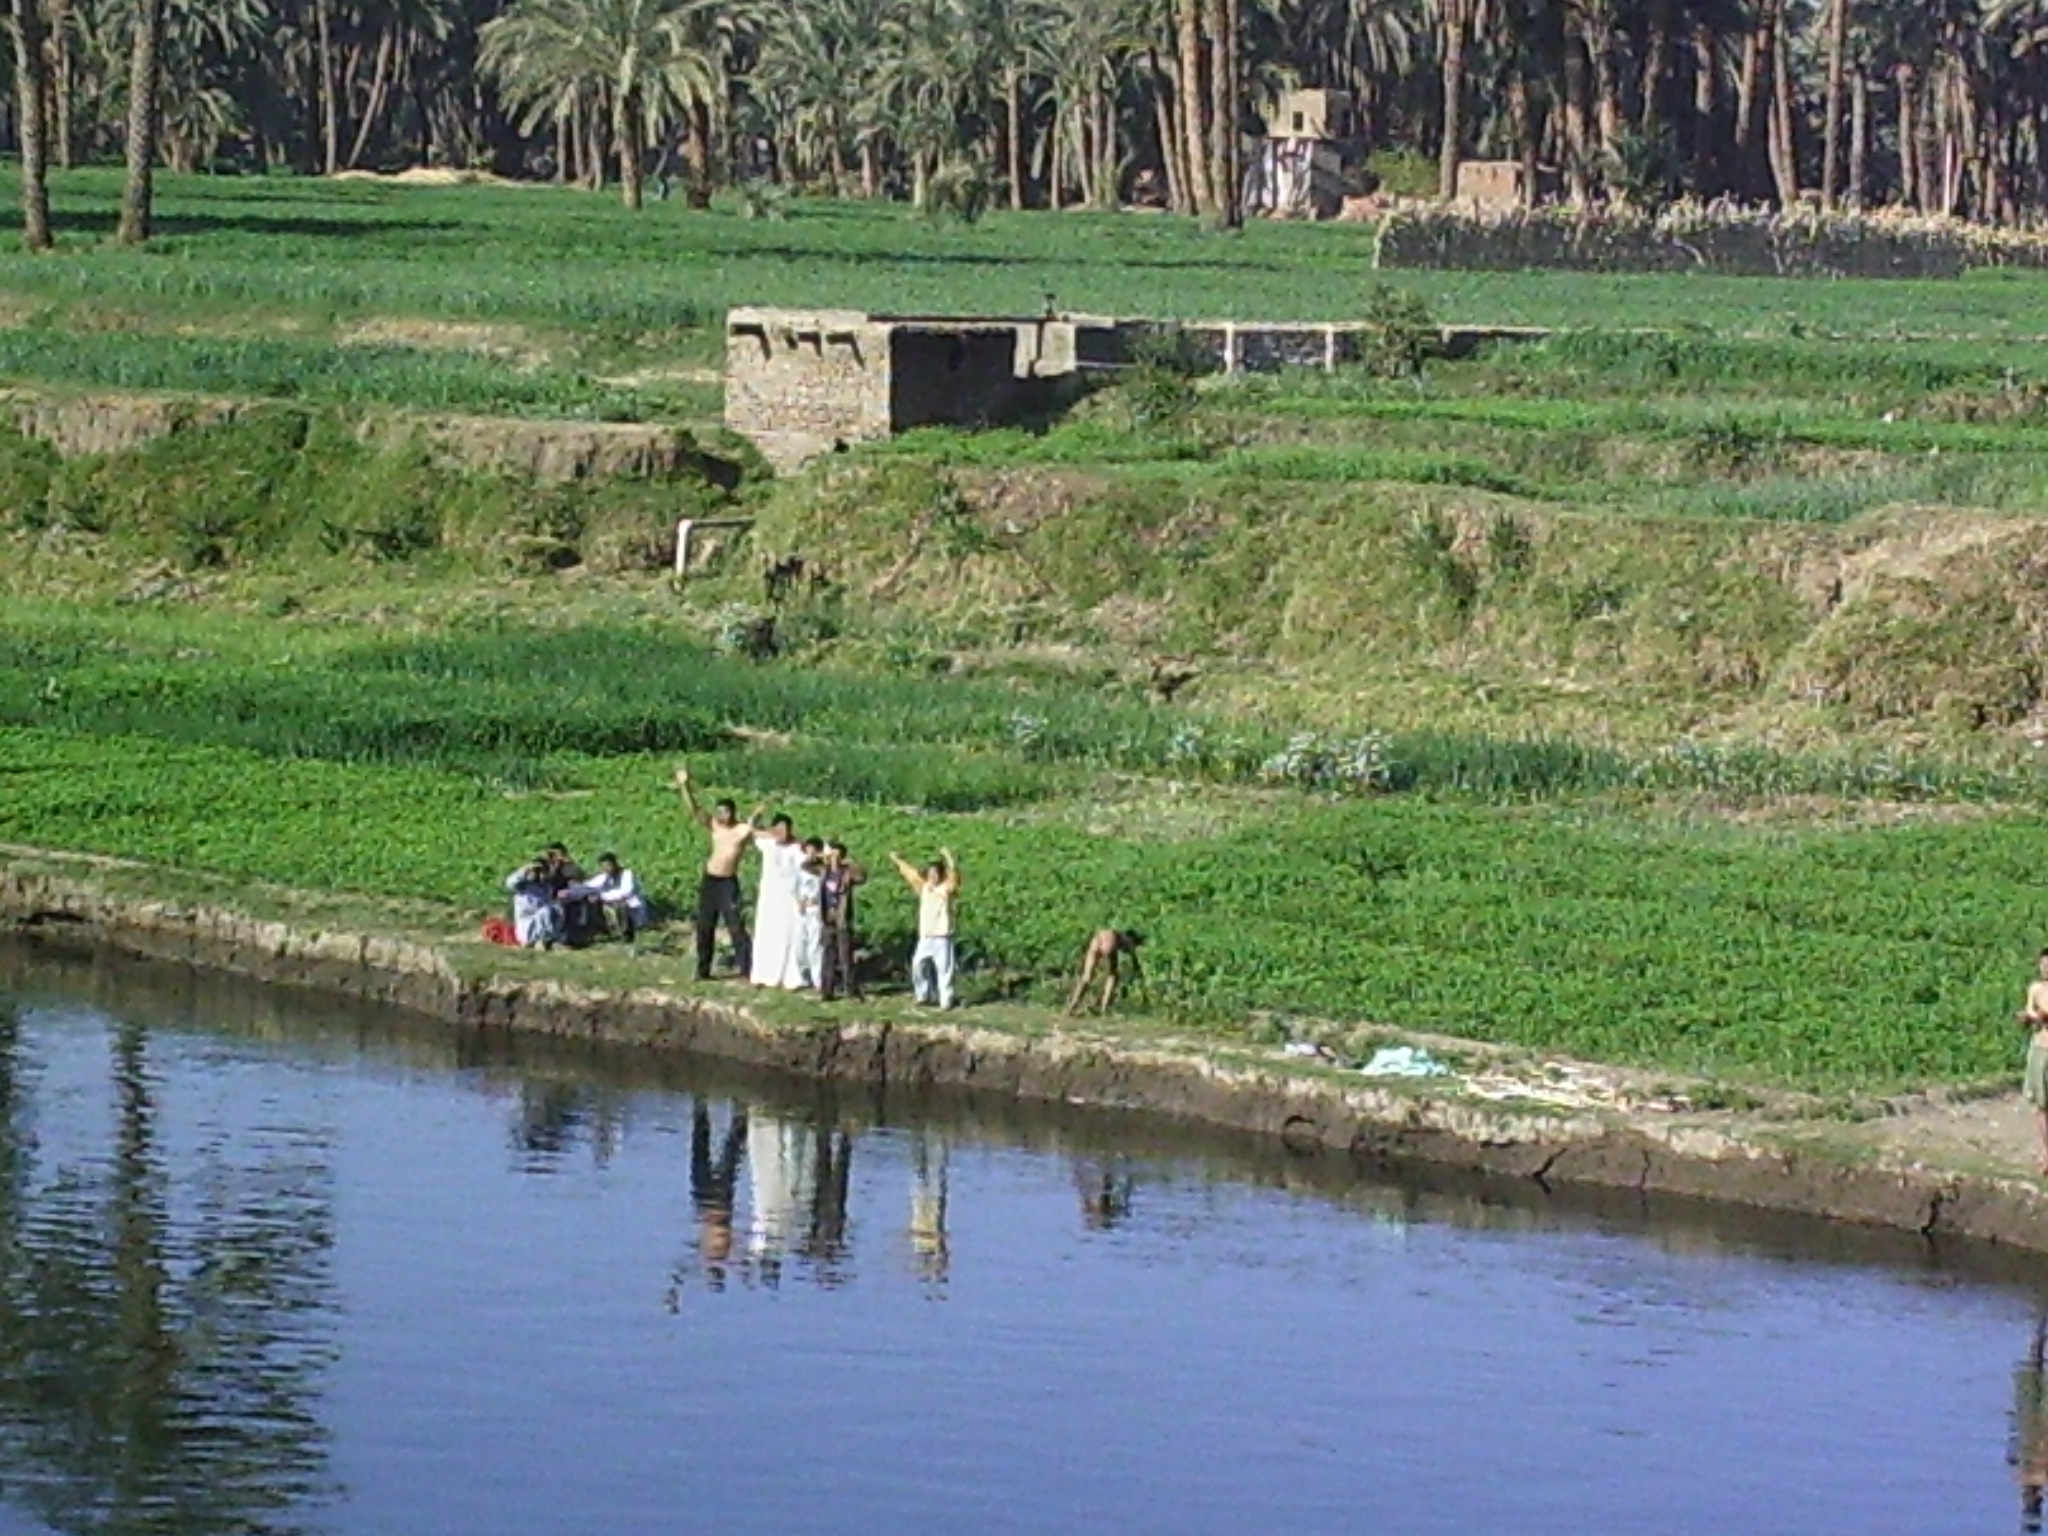  Banks of the Nile en route to Qena 